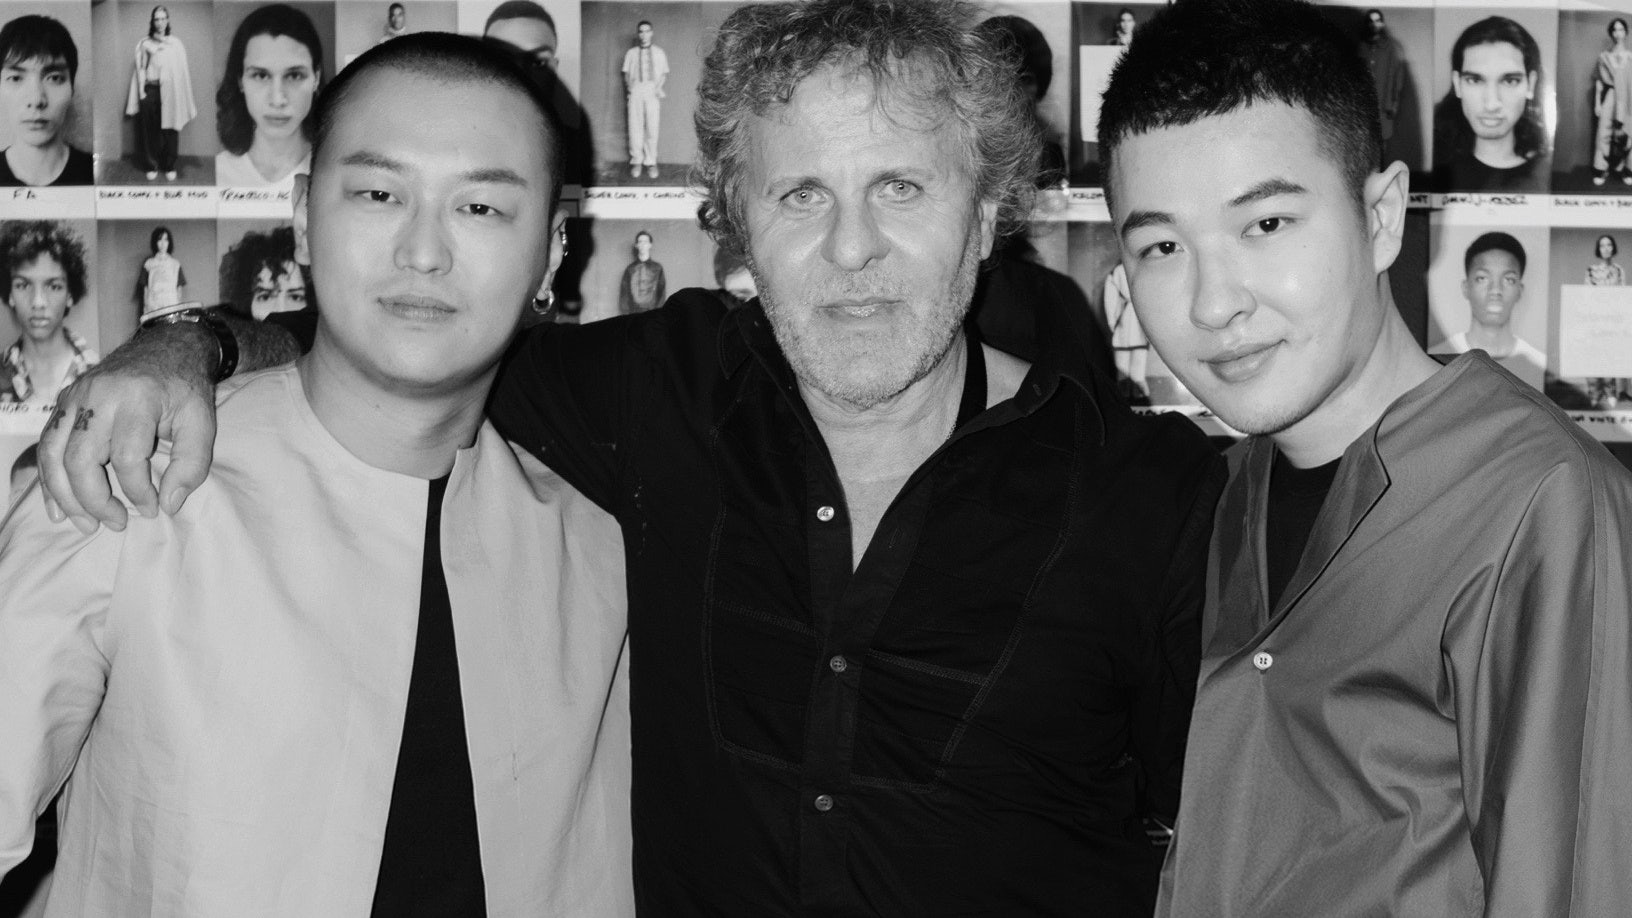 Diesel founder, Renzo Rosso (center) and Pronounce designers Yushan Li (left) and Jun Zhou (right). Photo: Courtesy of Diesel  